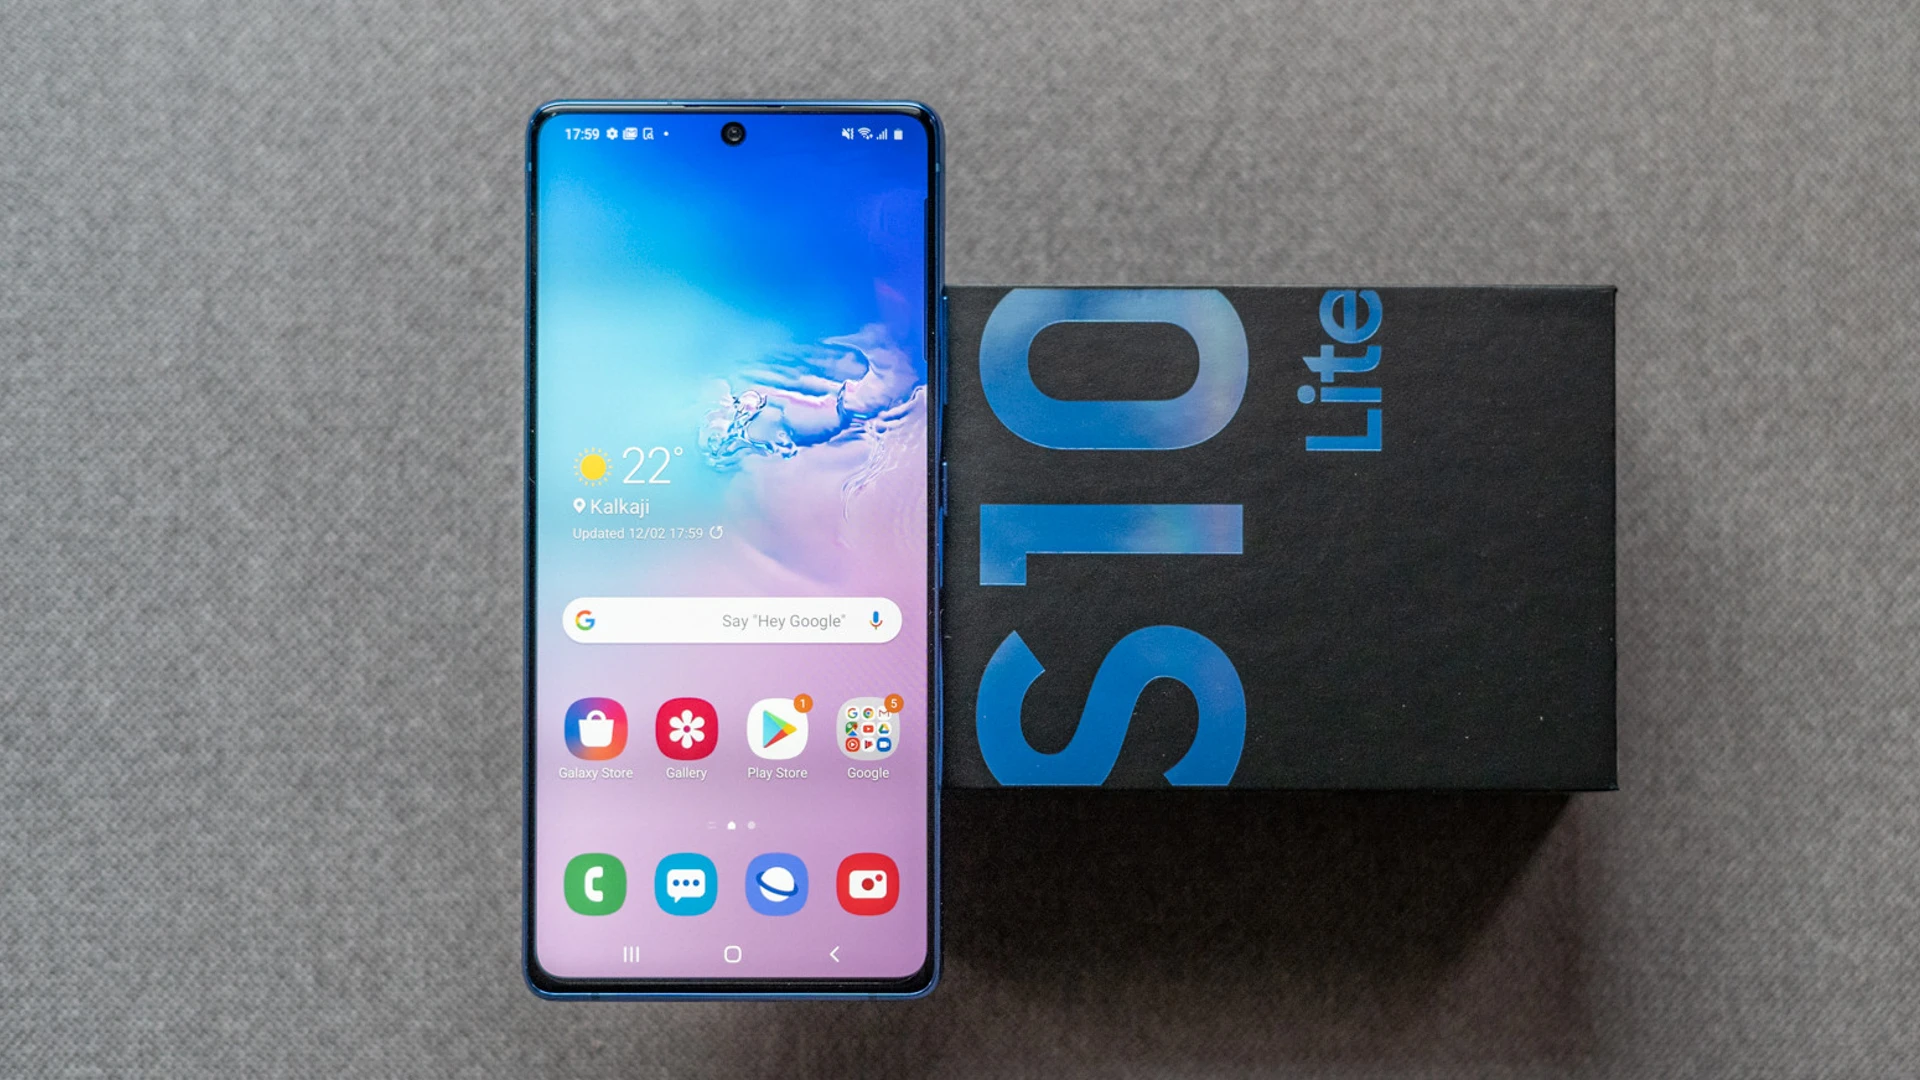 The Galaxy S10 Lite is now receiving the Android 12 Update